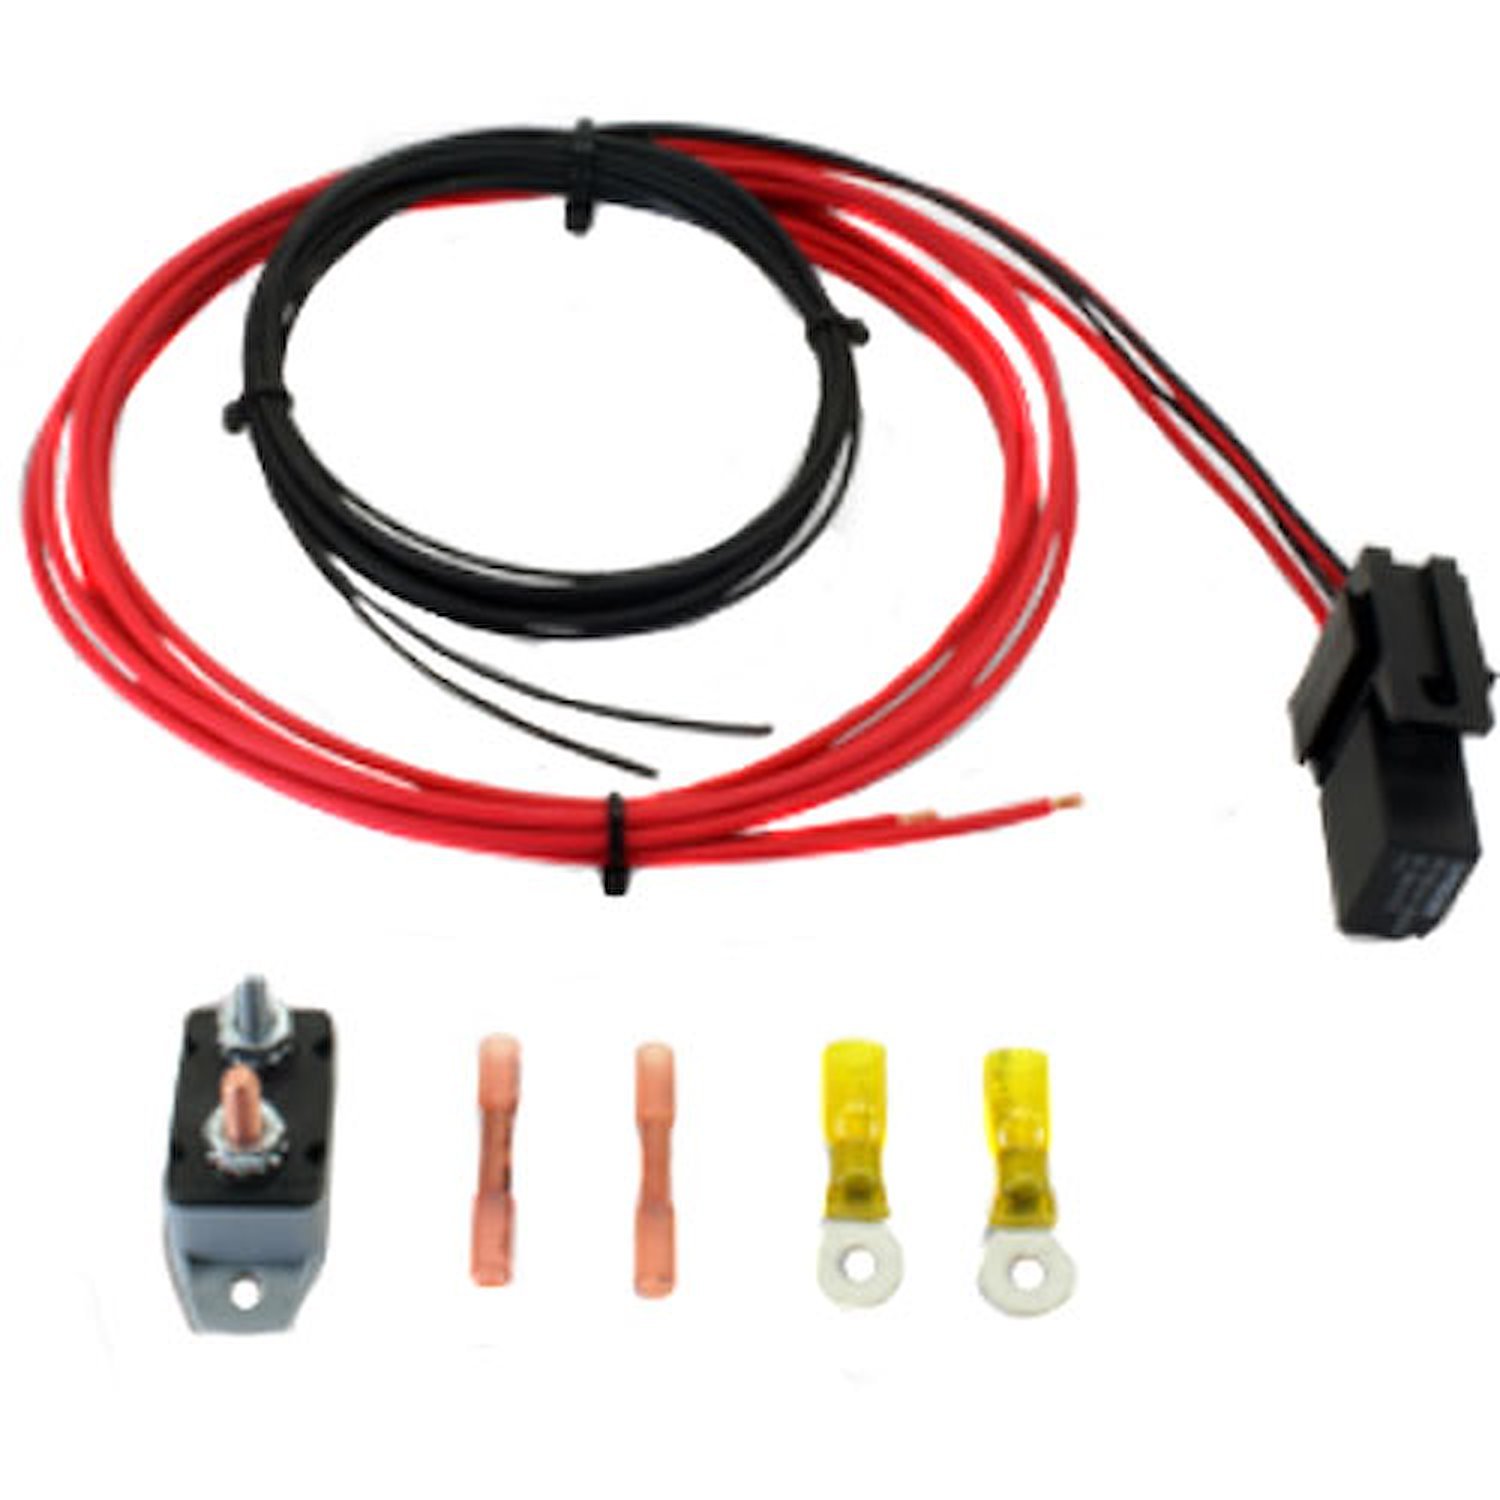 20 Amp Relay Wiring Kit Includes: 20 Amp